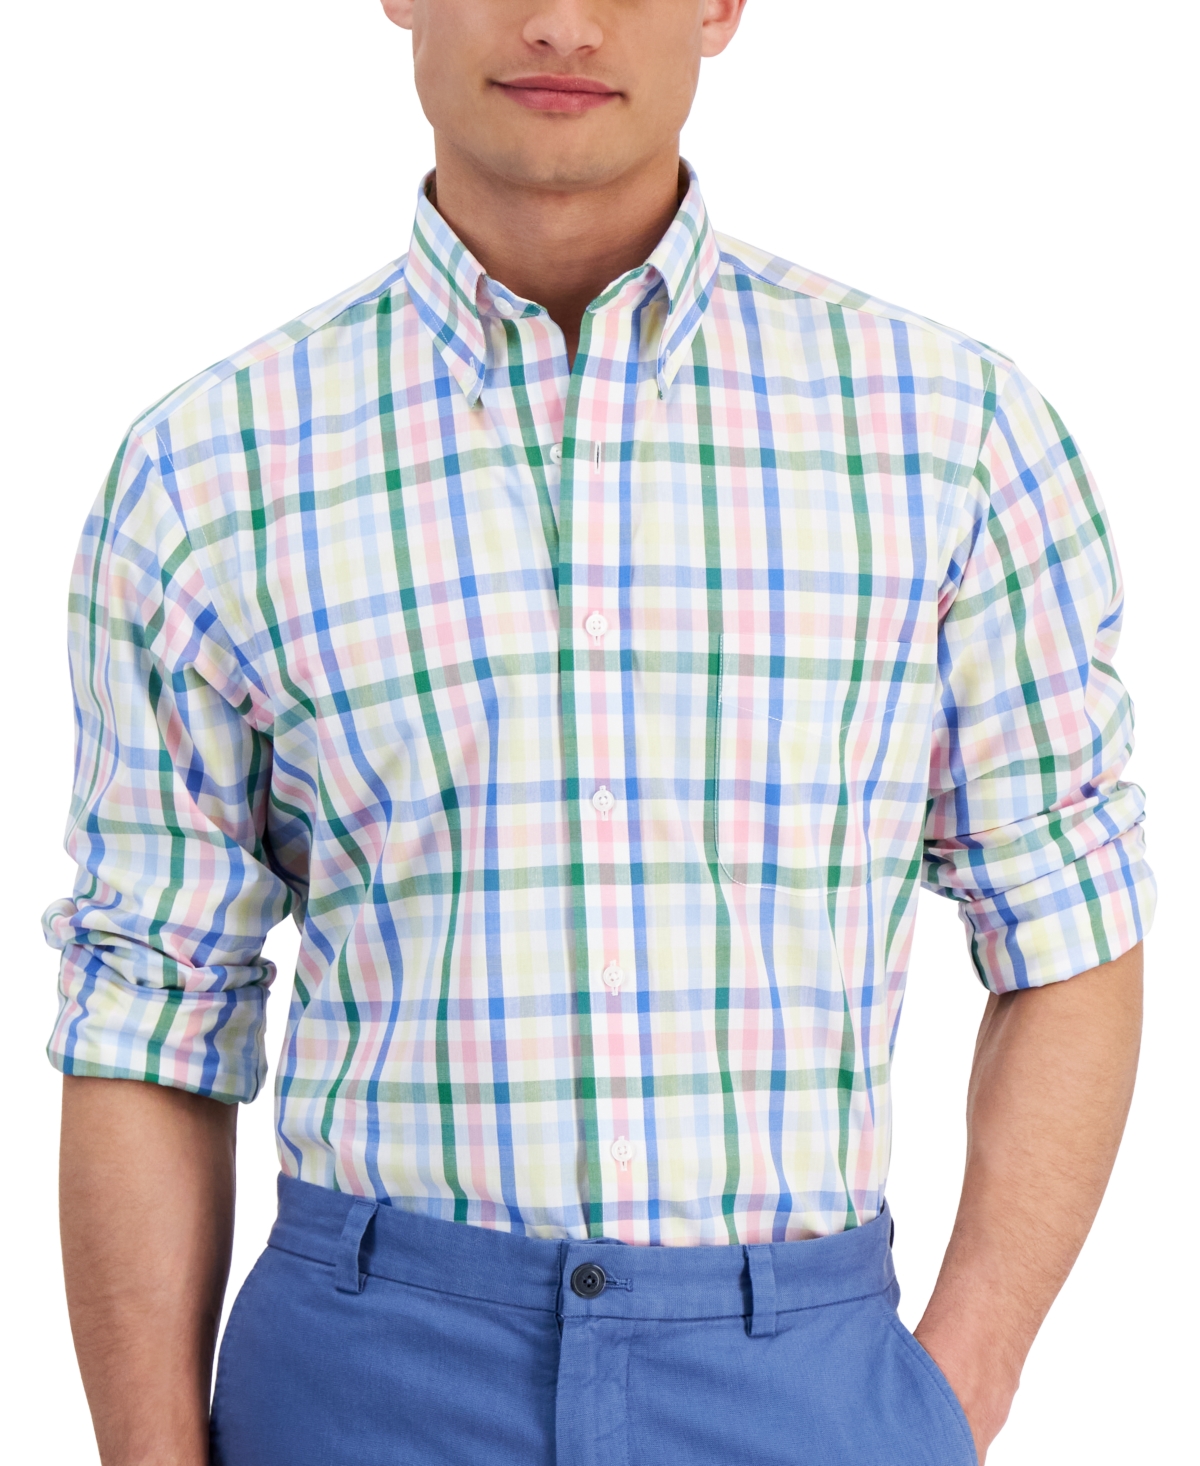 Men's Regular-Fit Multicolor Plaid Dress Shirt, Created for Macy's - Spring